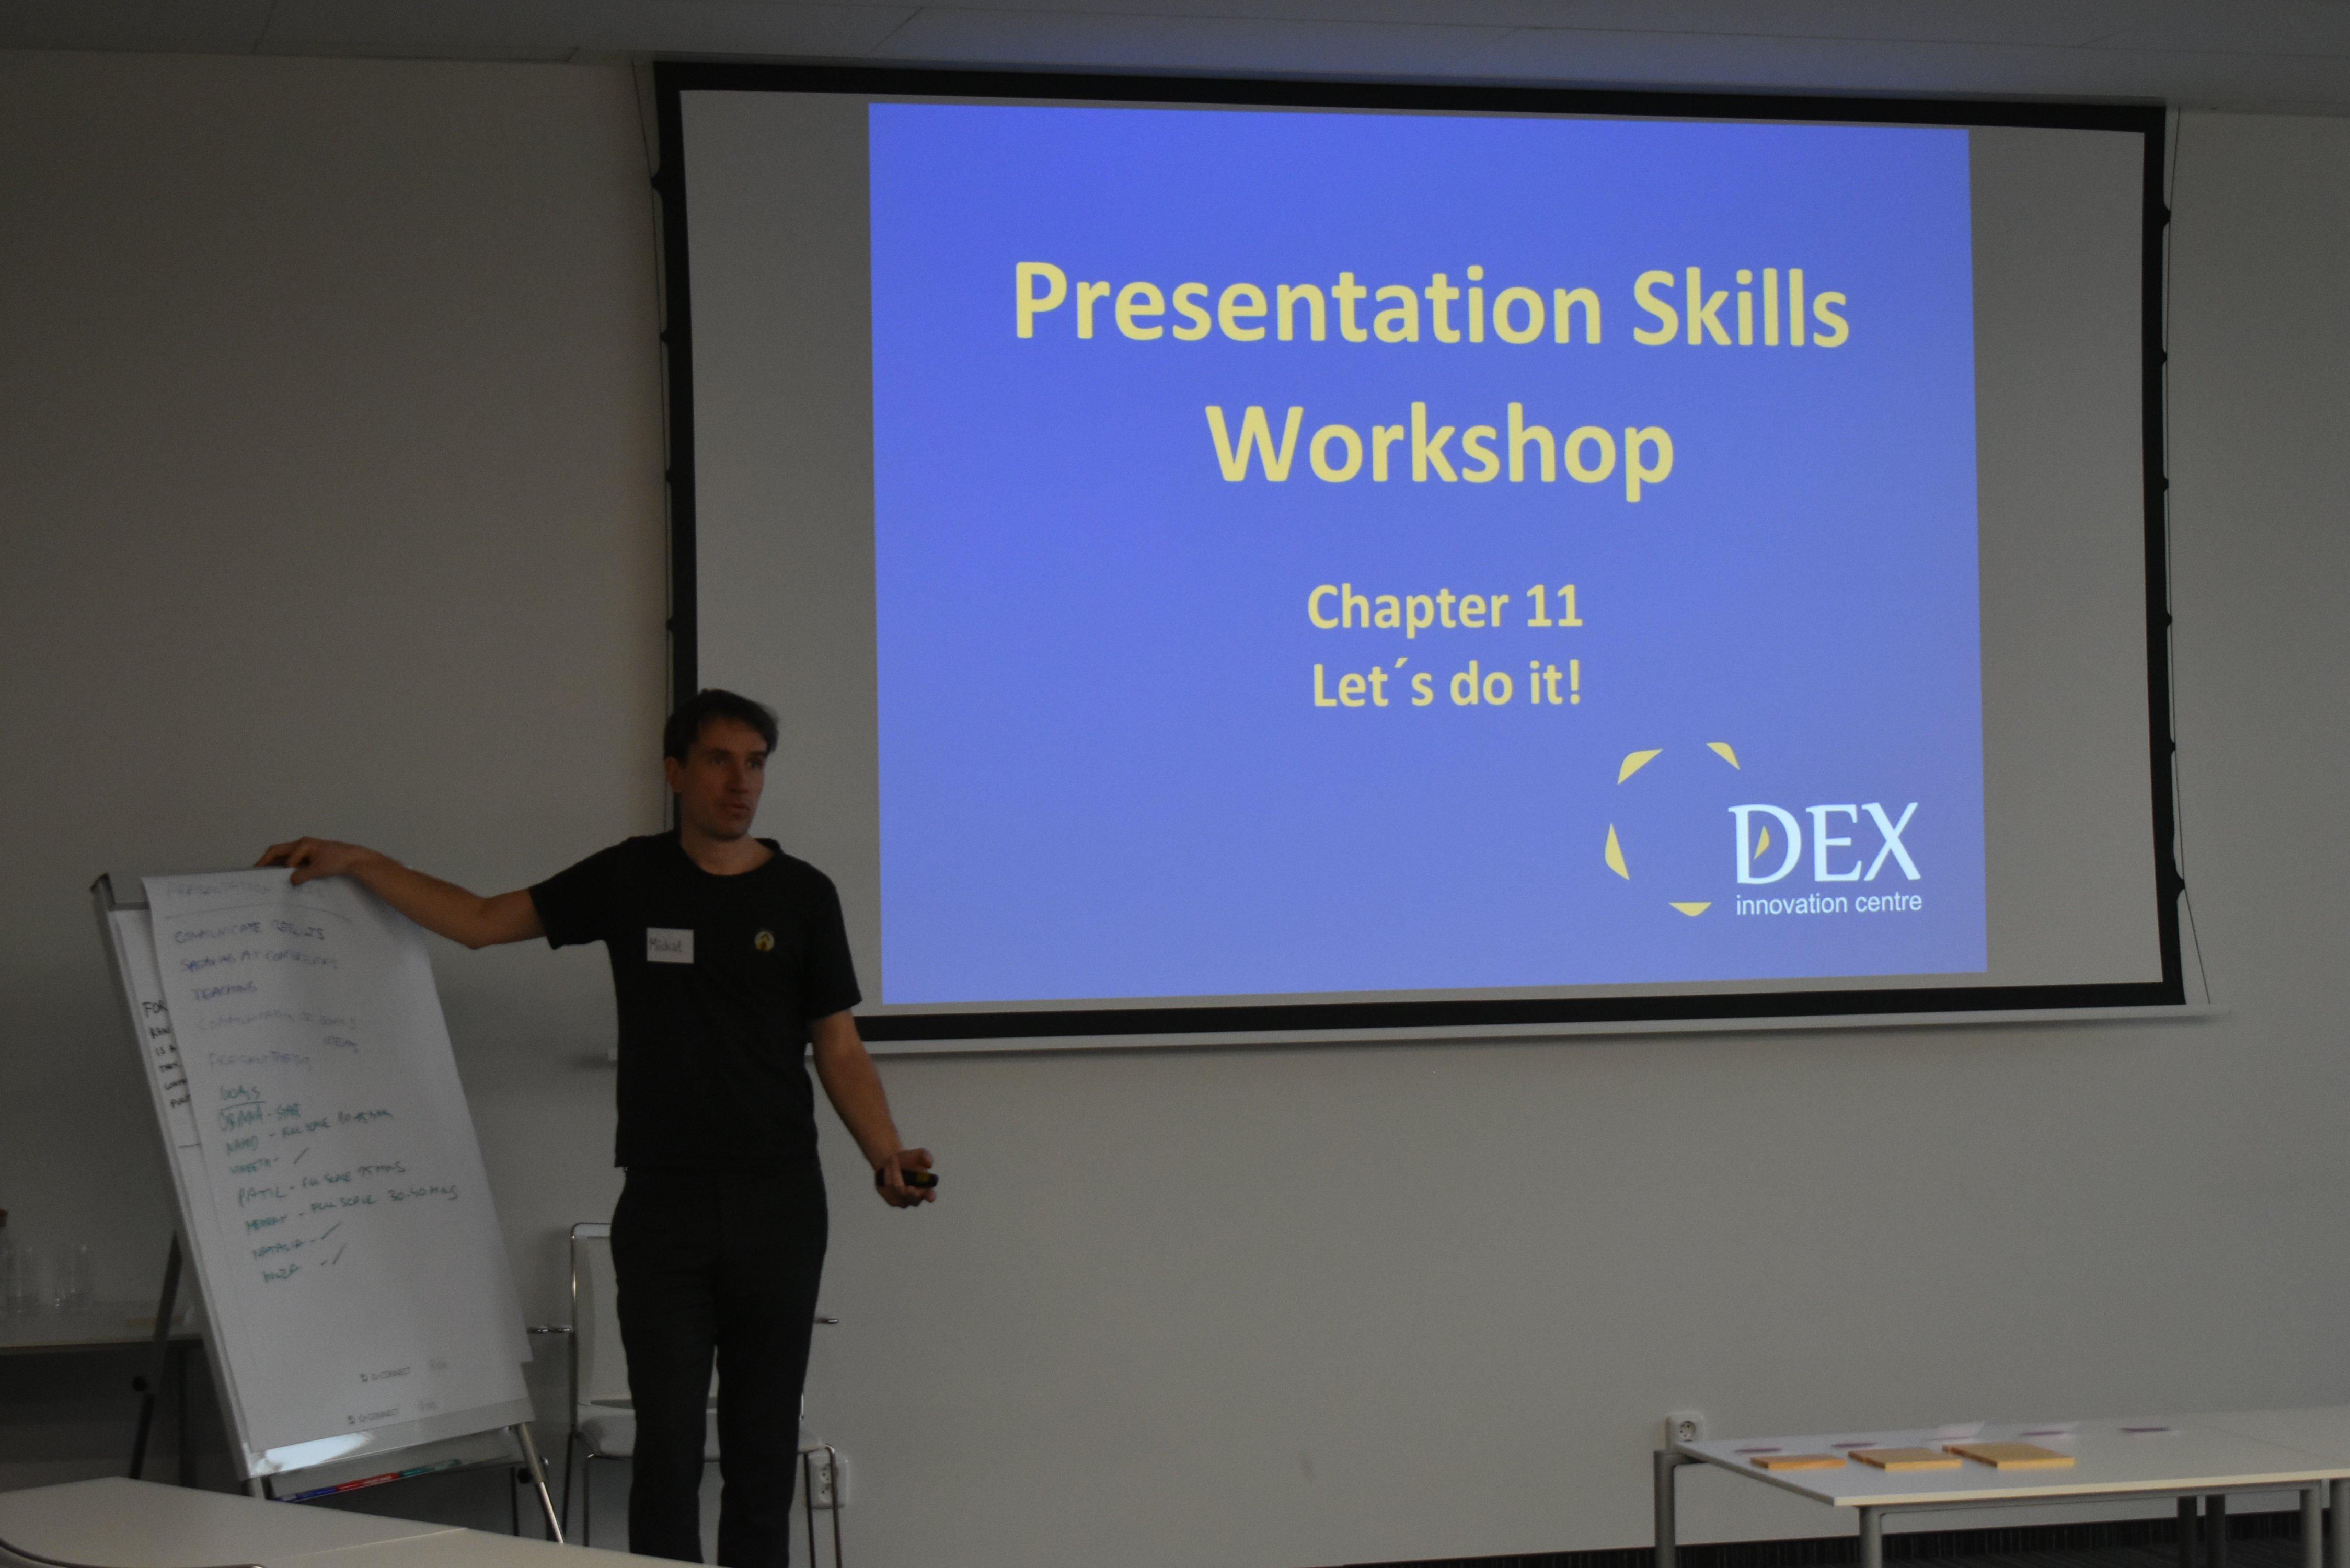 University of Pardubice Ph.D. students trained in presentation skills